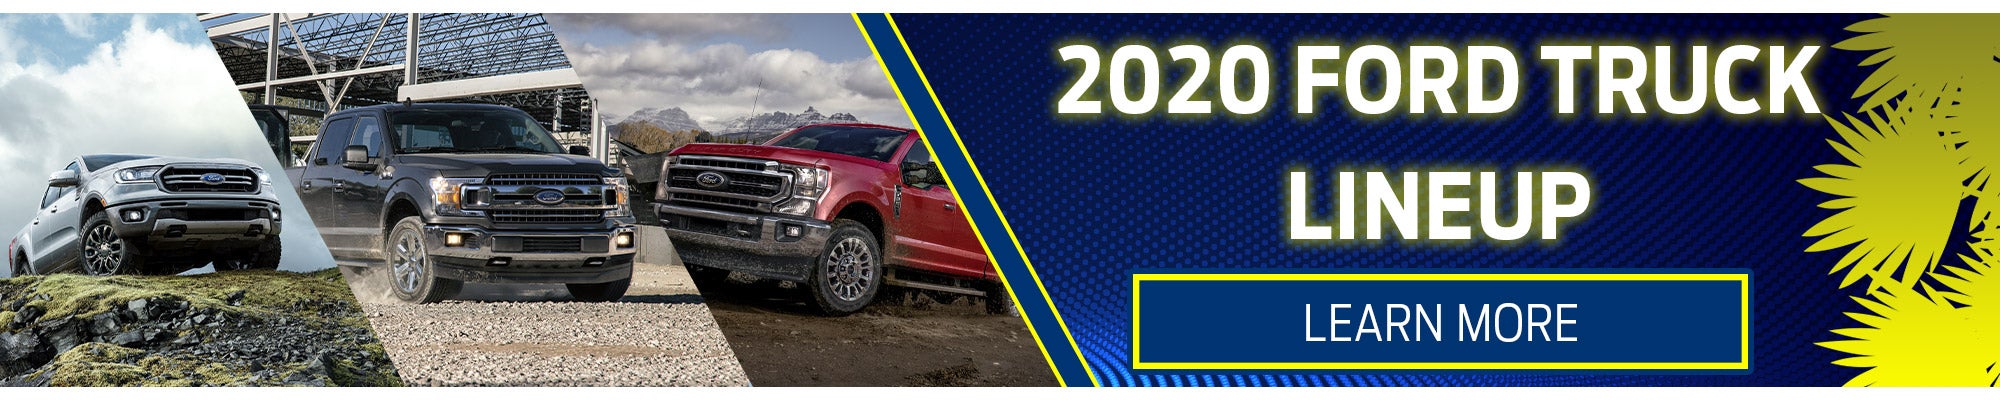 2020 Ford F-150 Truck Lineup 